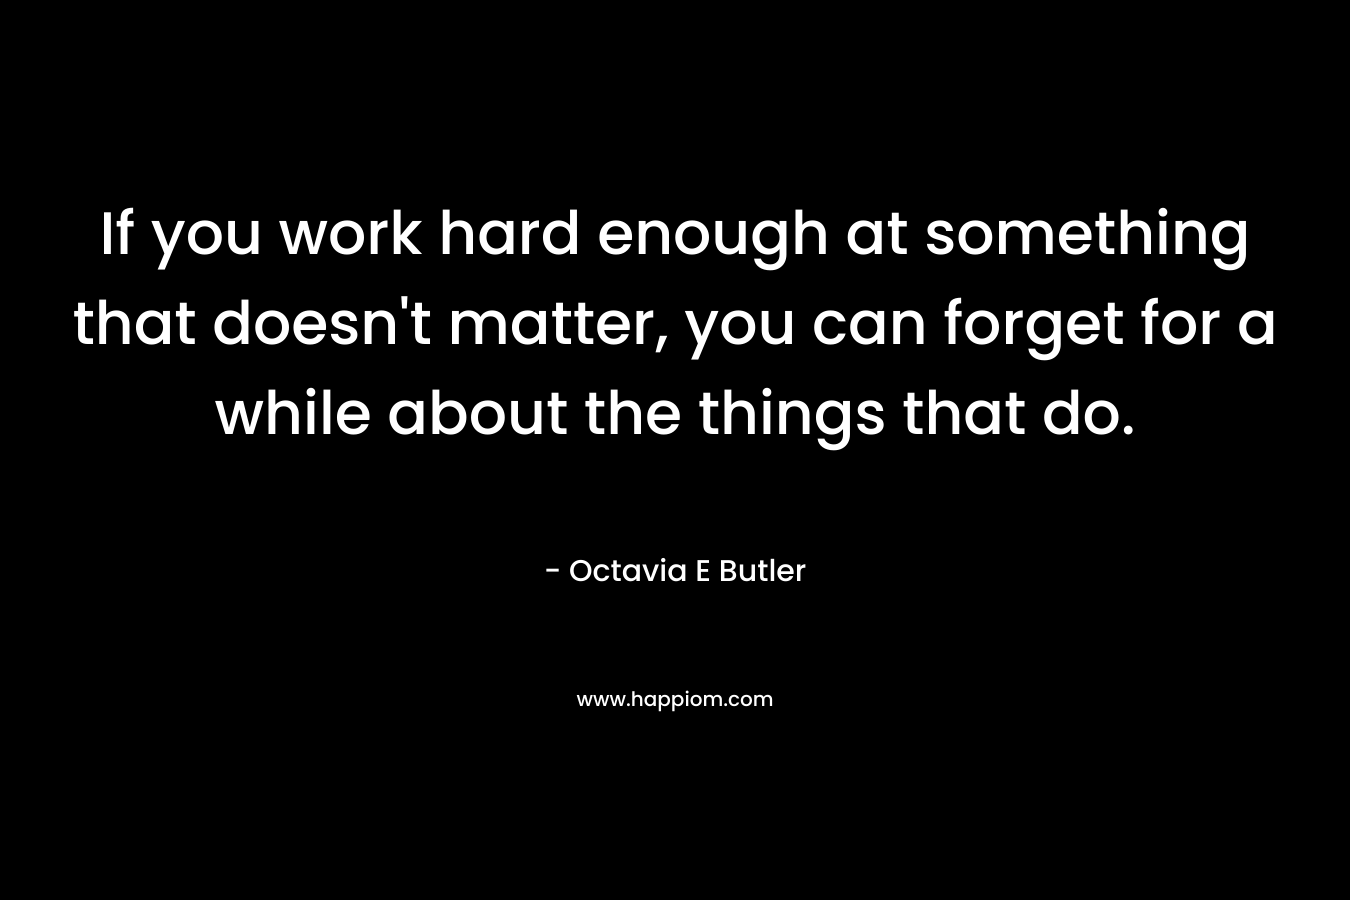 If you work hard enough at something that doesn’t matter, you can forget for a while about the things that do. – Octavia E Butler